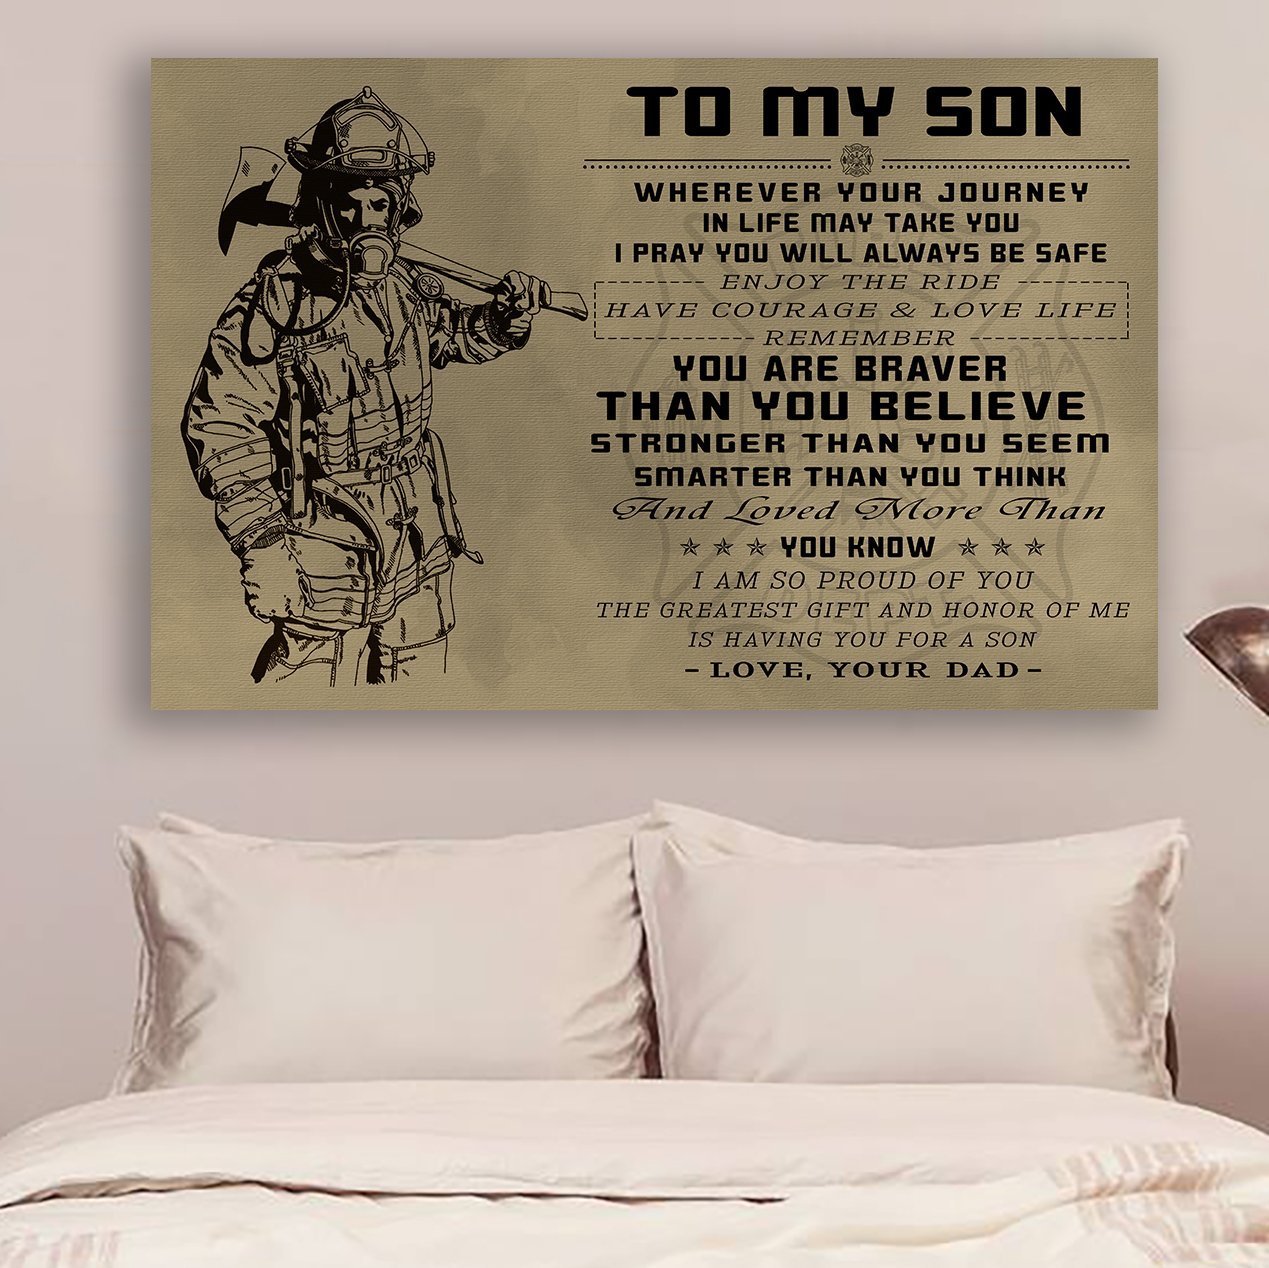 Firefighter Canvas and Poster ��� To my son ��� You are braver wall decor visual art - GIFTCUSTOM